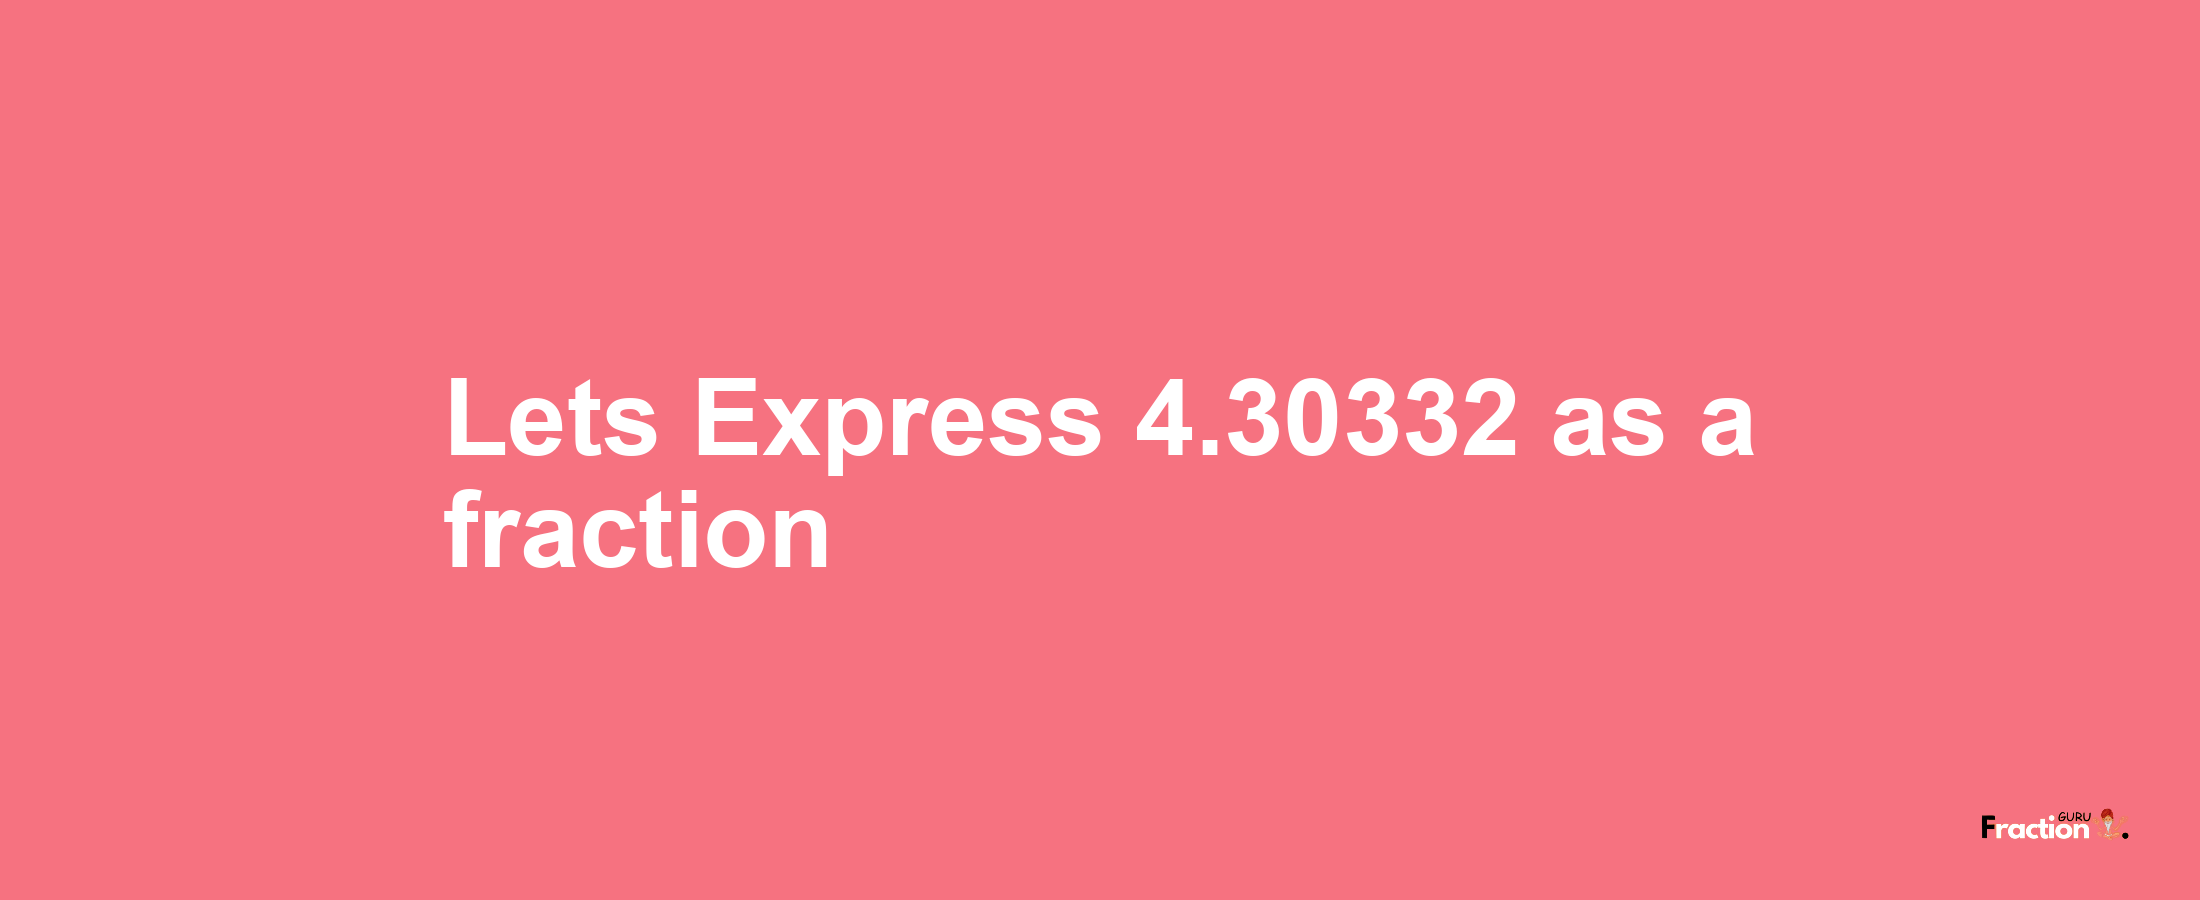 Lets Express 4.30332 as afraction